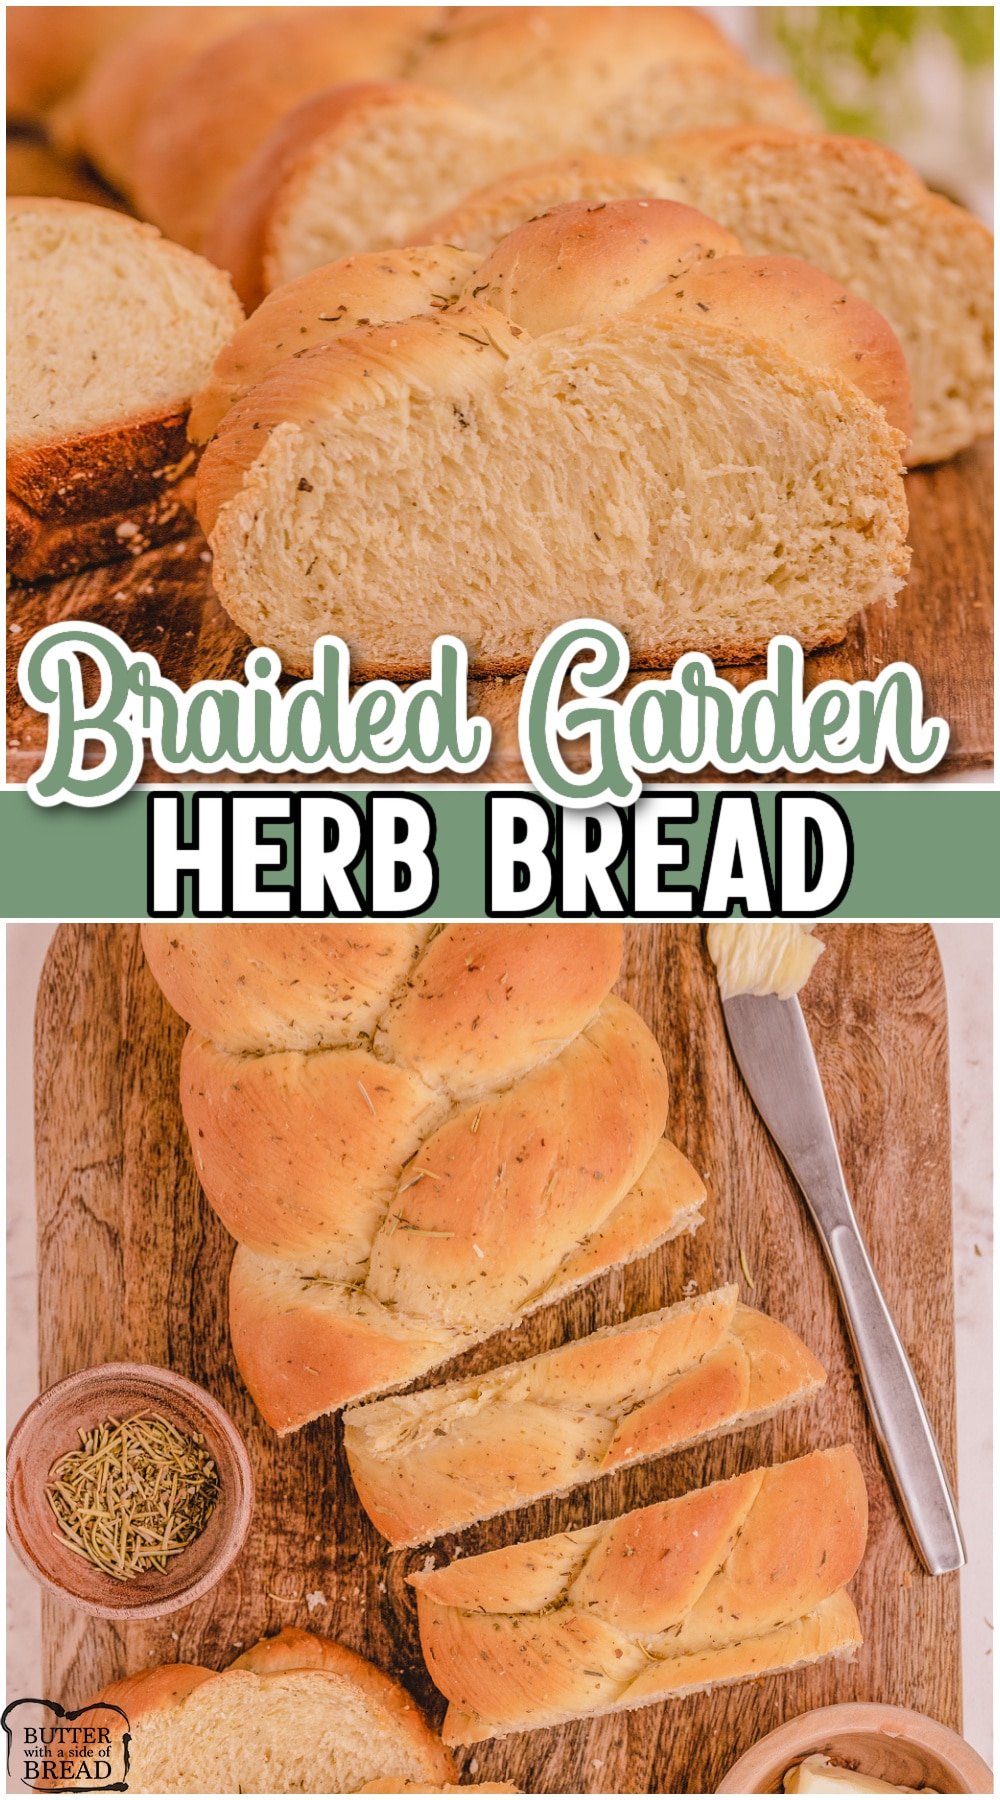 Braided Garden Herb Bread is a beautiful homemade bread with amazing flavor! Herb bread recipe made with rosemary and thyme for a delightful savory loaf. 